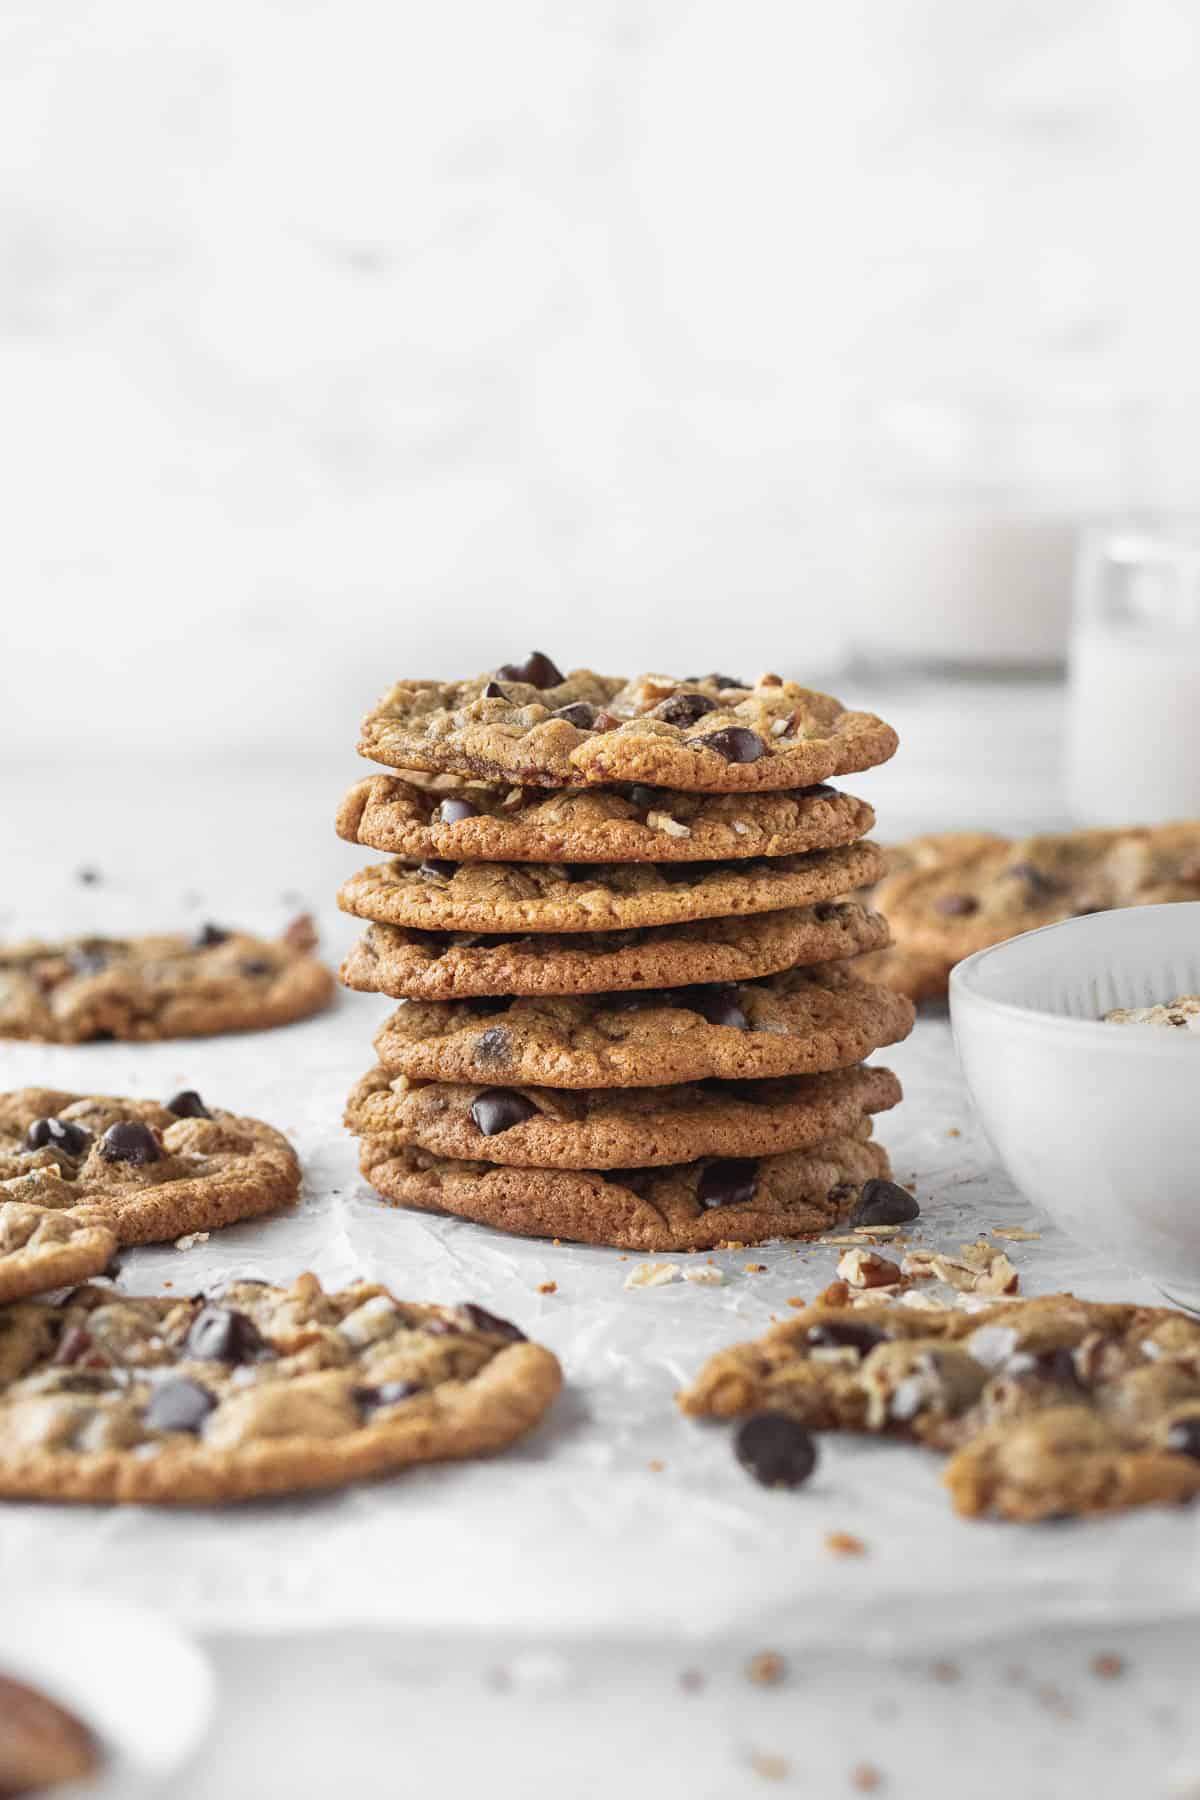 sidesways shot of a stack of thin and crispy oat flour chocolate chip cookies with a glass of milk in the background.